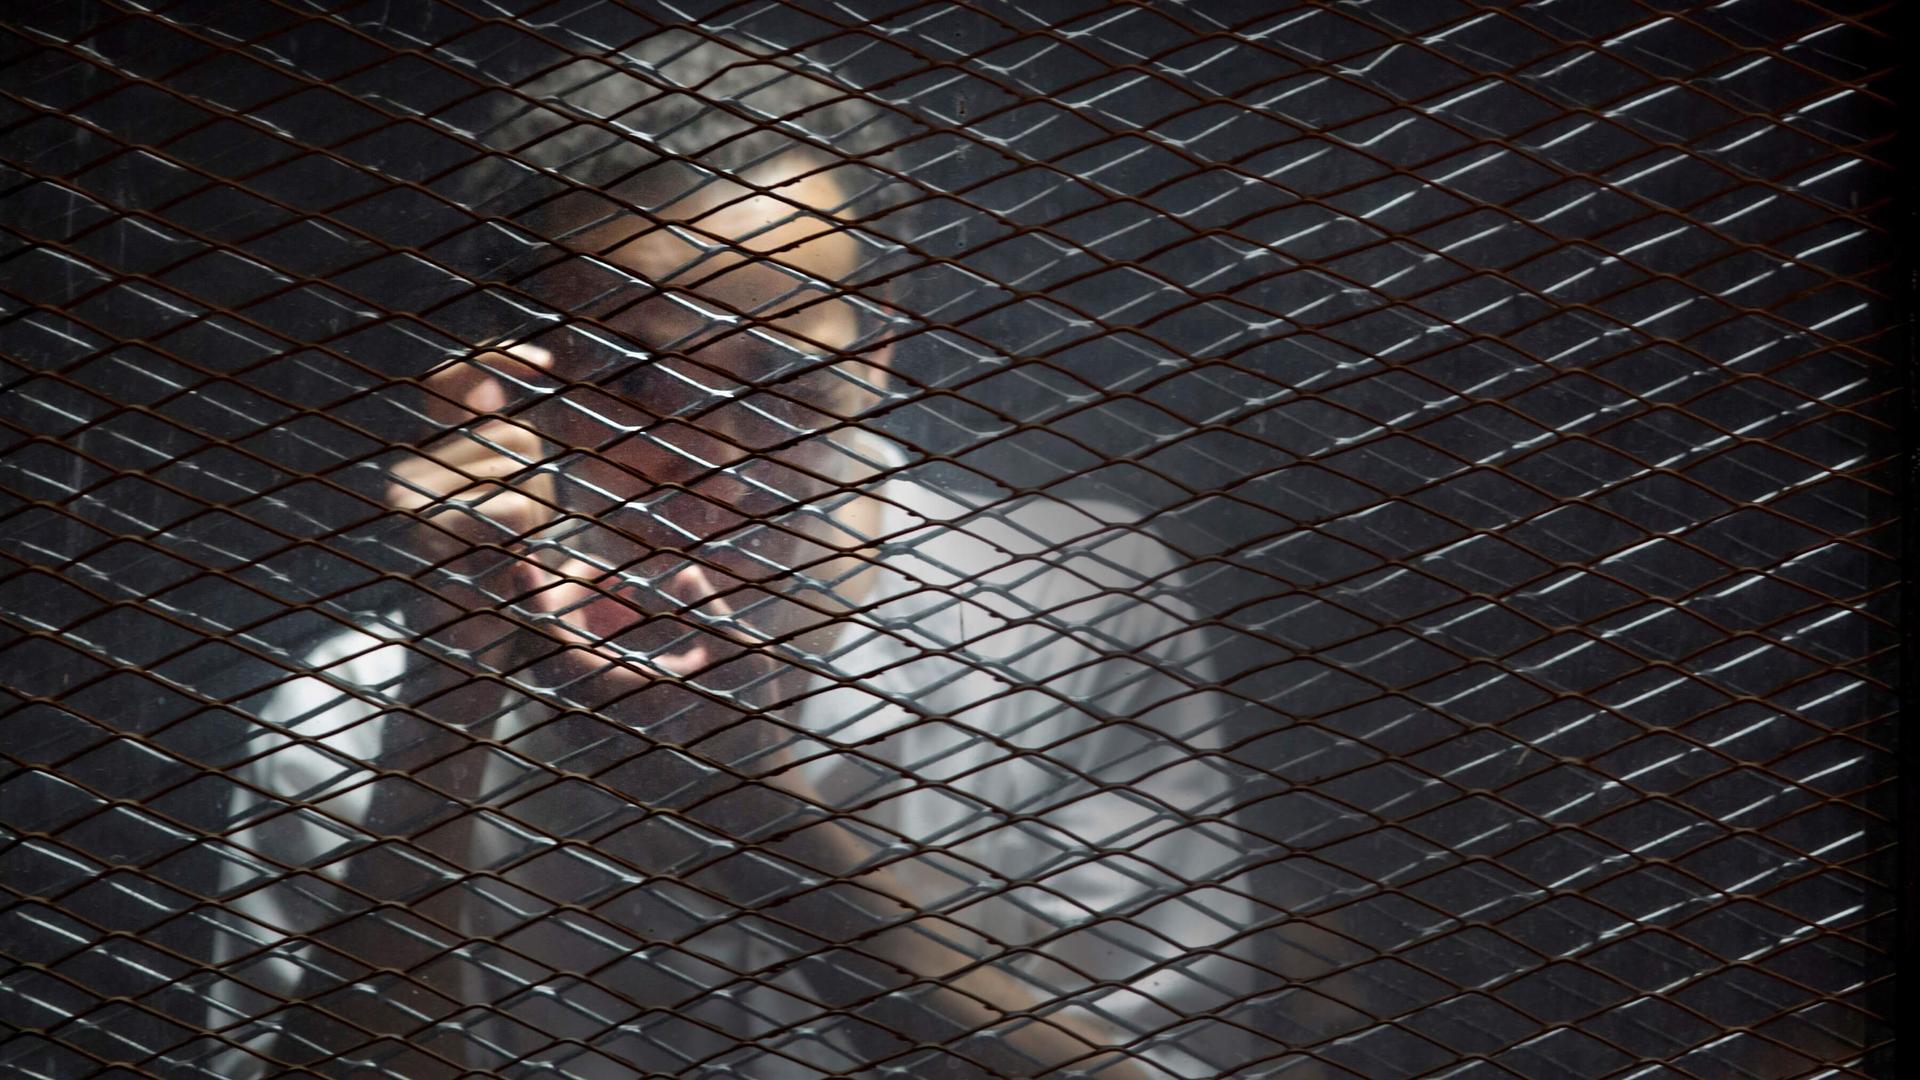 Egyptian photojournalist Mahmoud Abu Zied, known by his nickname Shawkan, gestures in a soundproof glass cage. 